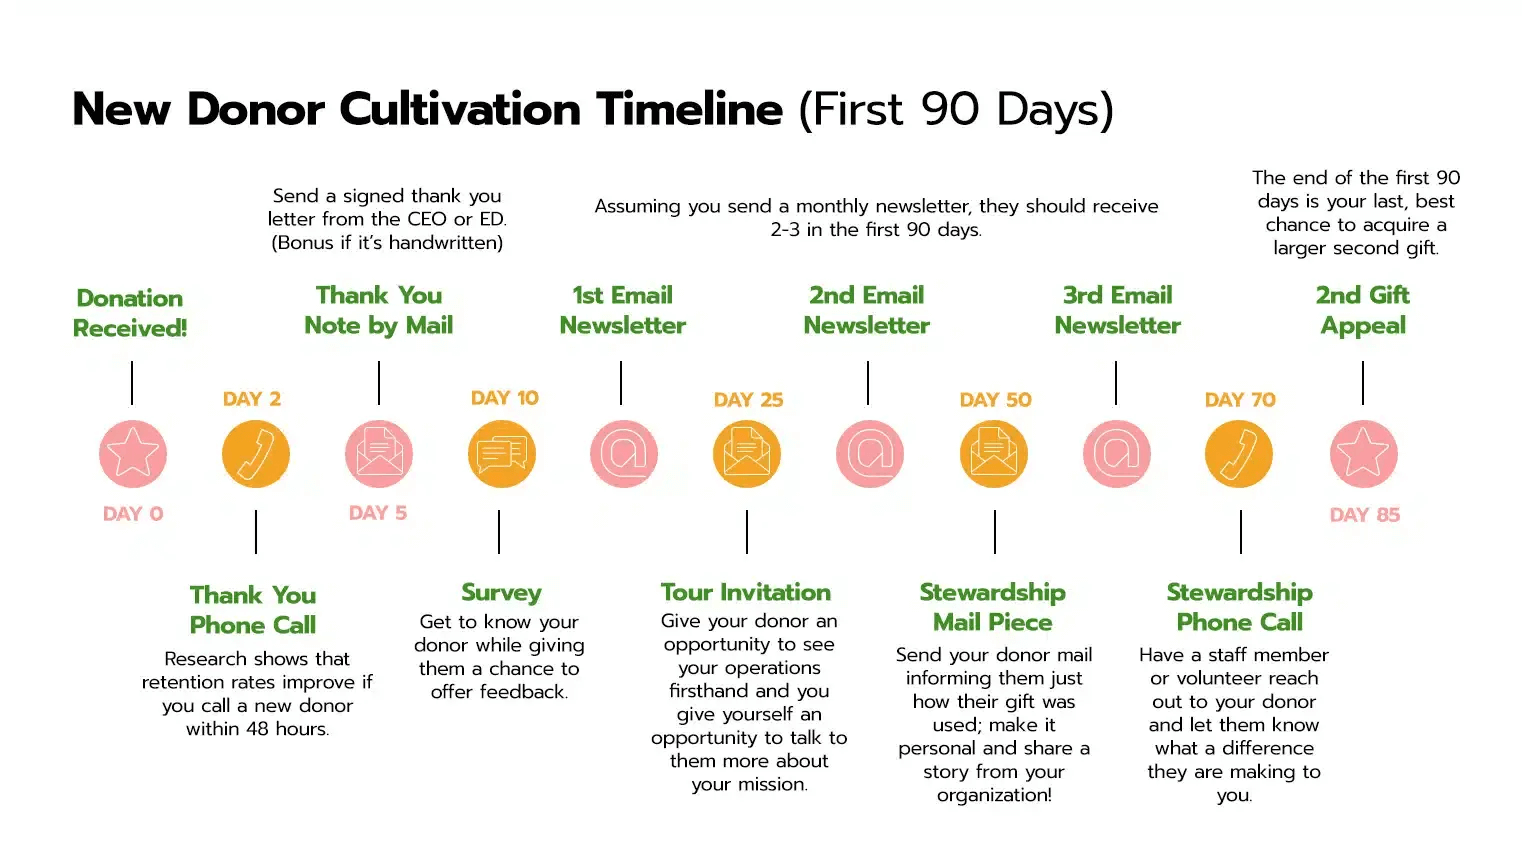 A new donor cultivation timeline for the first 90 days of their involvement, with steps for sending emails, surveys, phone calls, and more stewardship activities